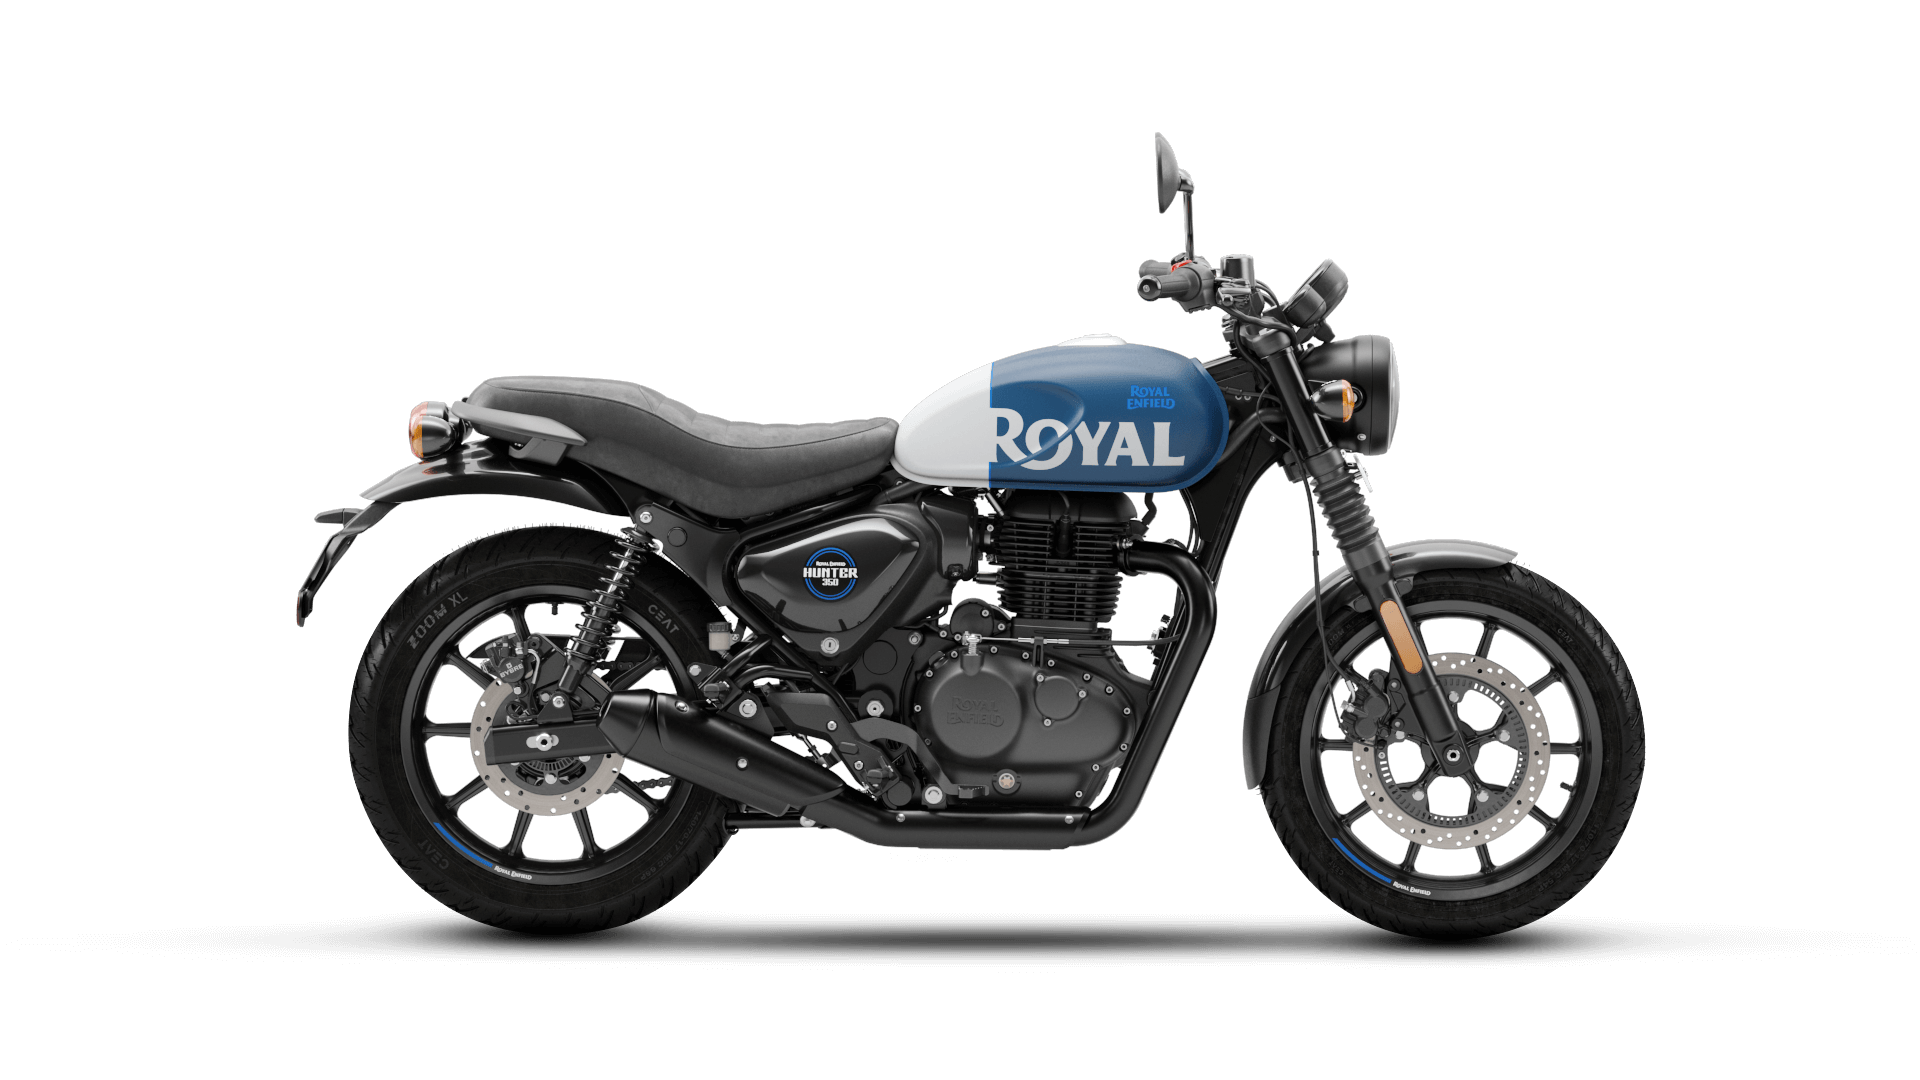 Royal Enfield launches its stylish and compact roadster Hunter 350 in Nepal